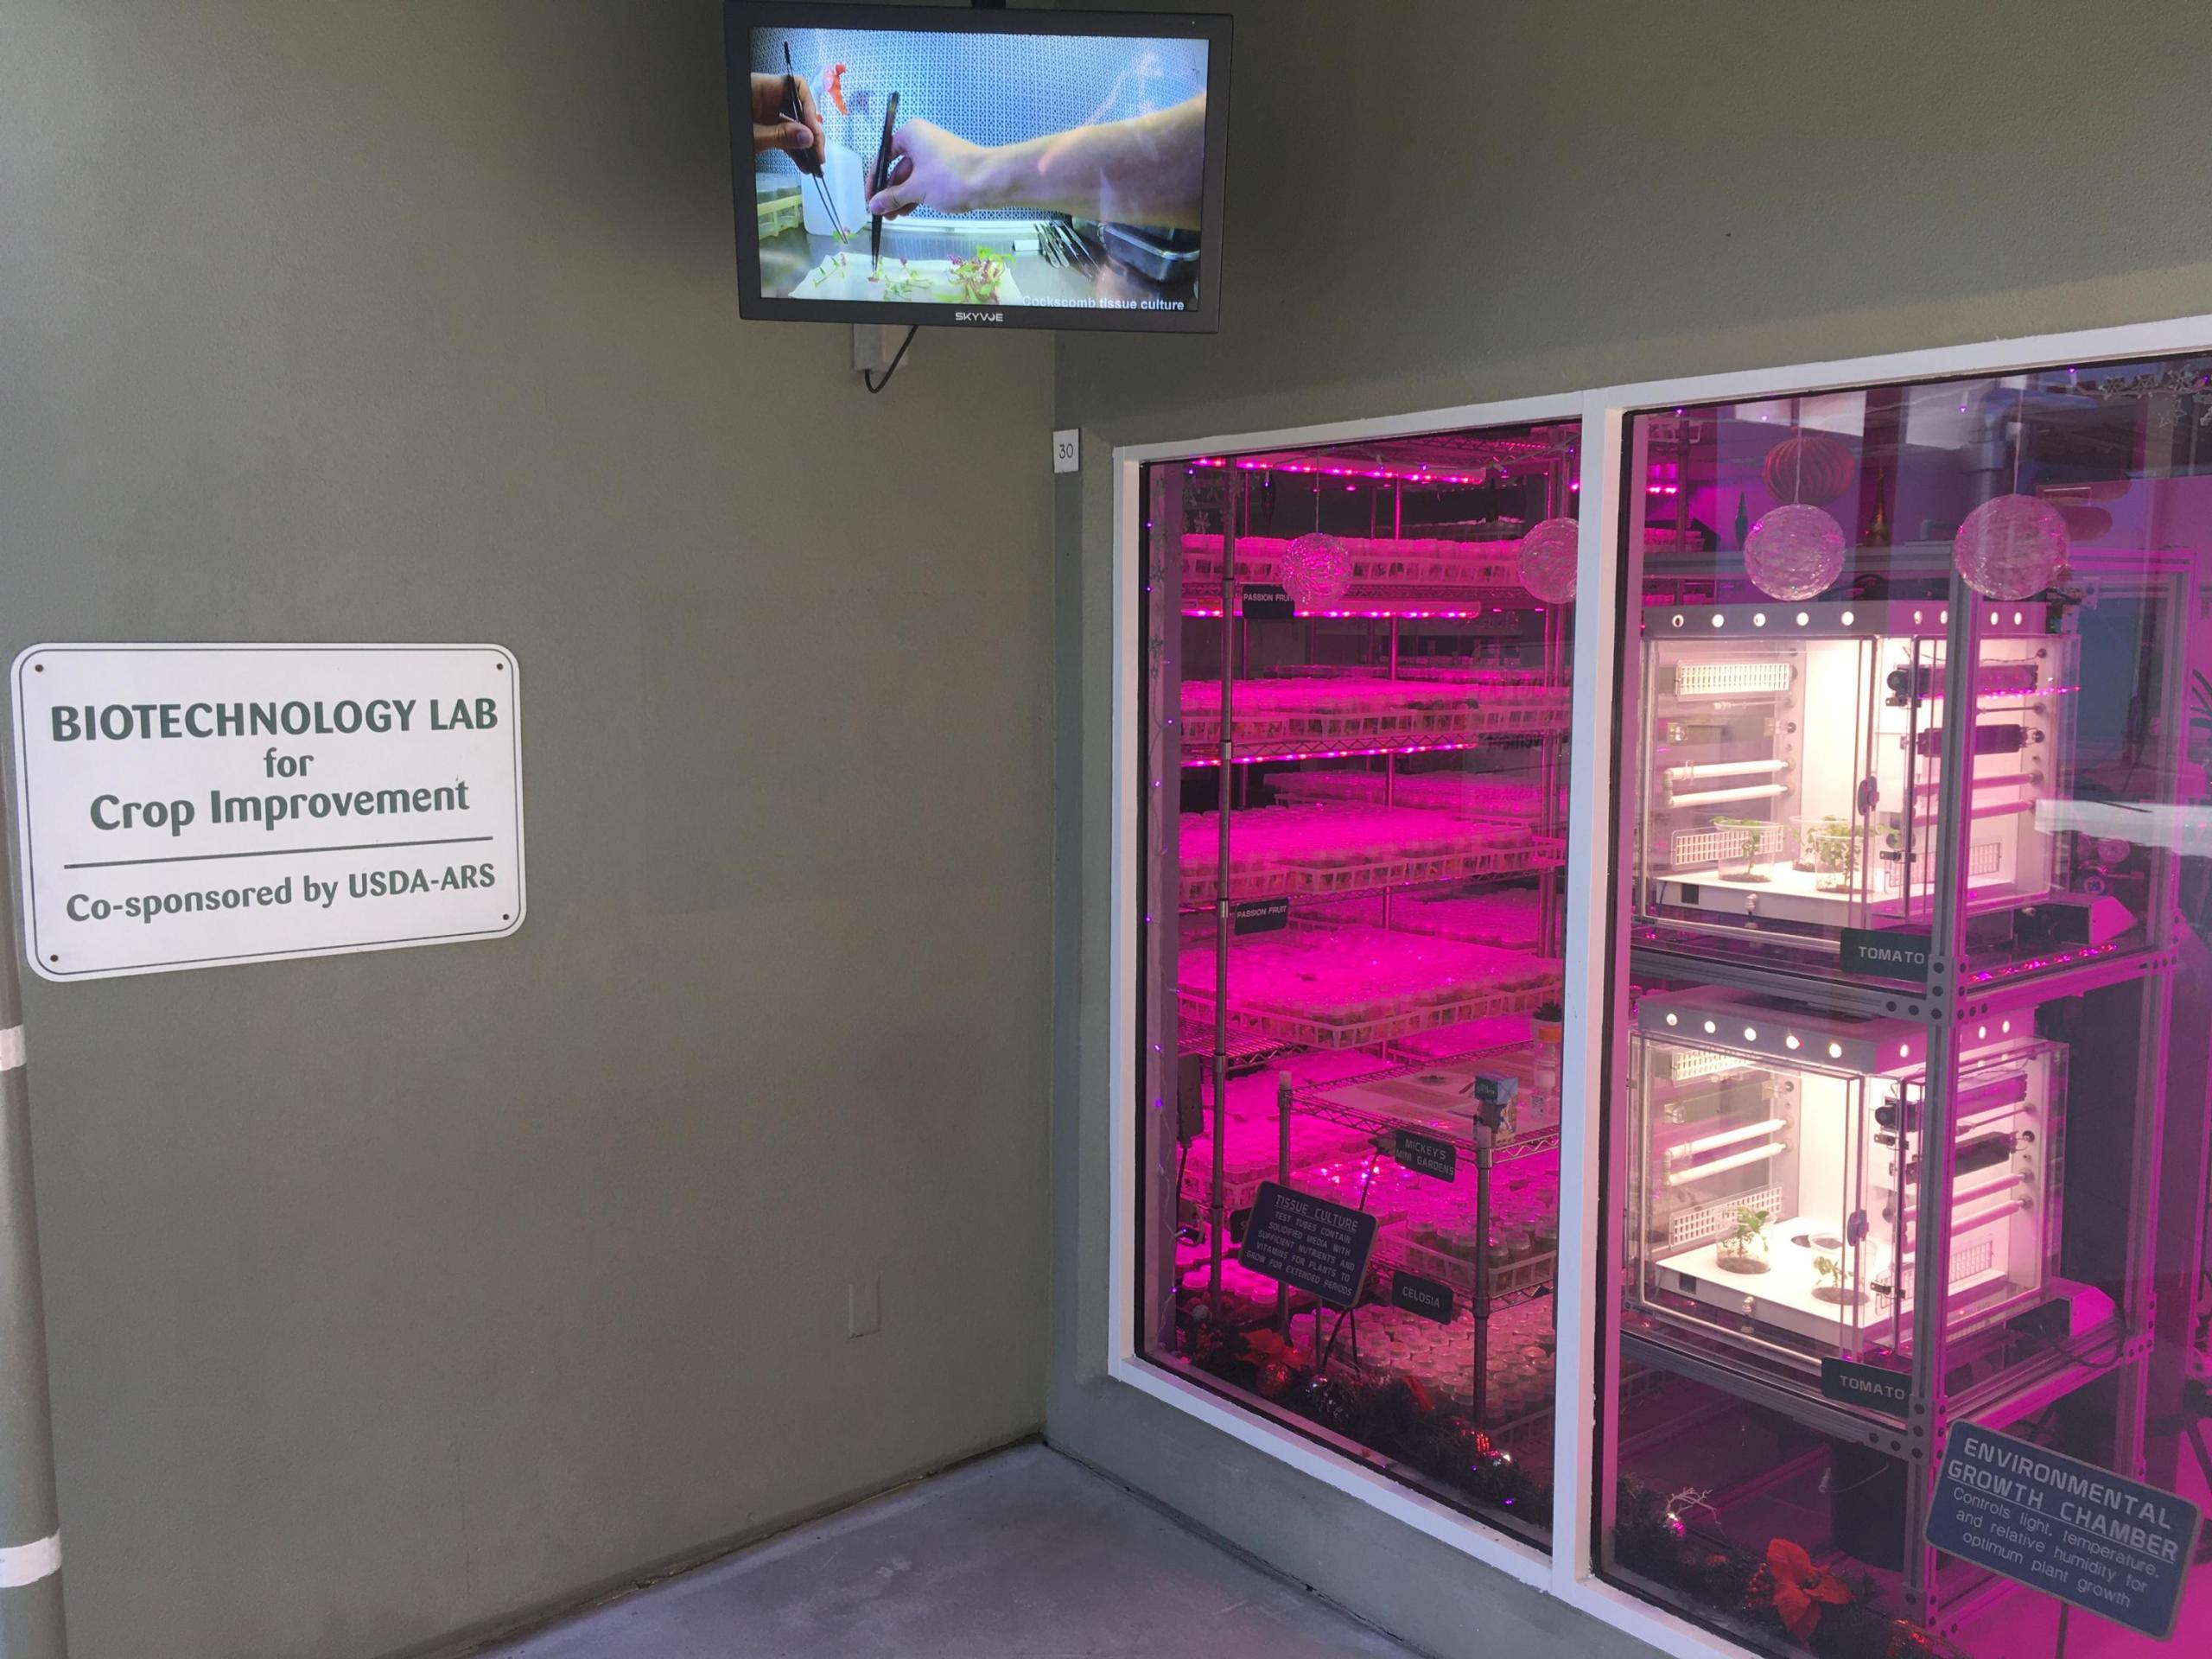 In this image, a sign to the left reads “BIOTECHNOLOGY LAB for Crop Improvement Co-sponsored by USDA-ARS.” To the right are windows that are illuminated by a magenta light and show two illuminated white squares stacked one over the other, which are plant growing chambers developed by NASA’s Biological and Physical Sciences Division at Kennedy Space Center. At the top of the image is a screen depicting scientists at work.